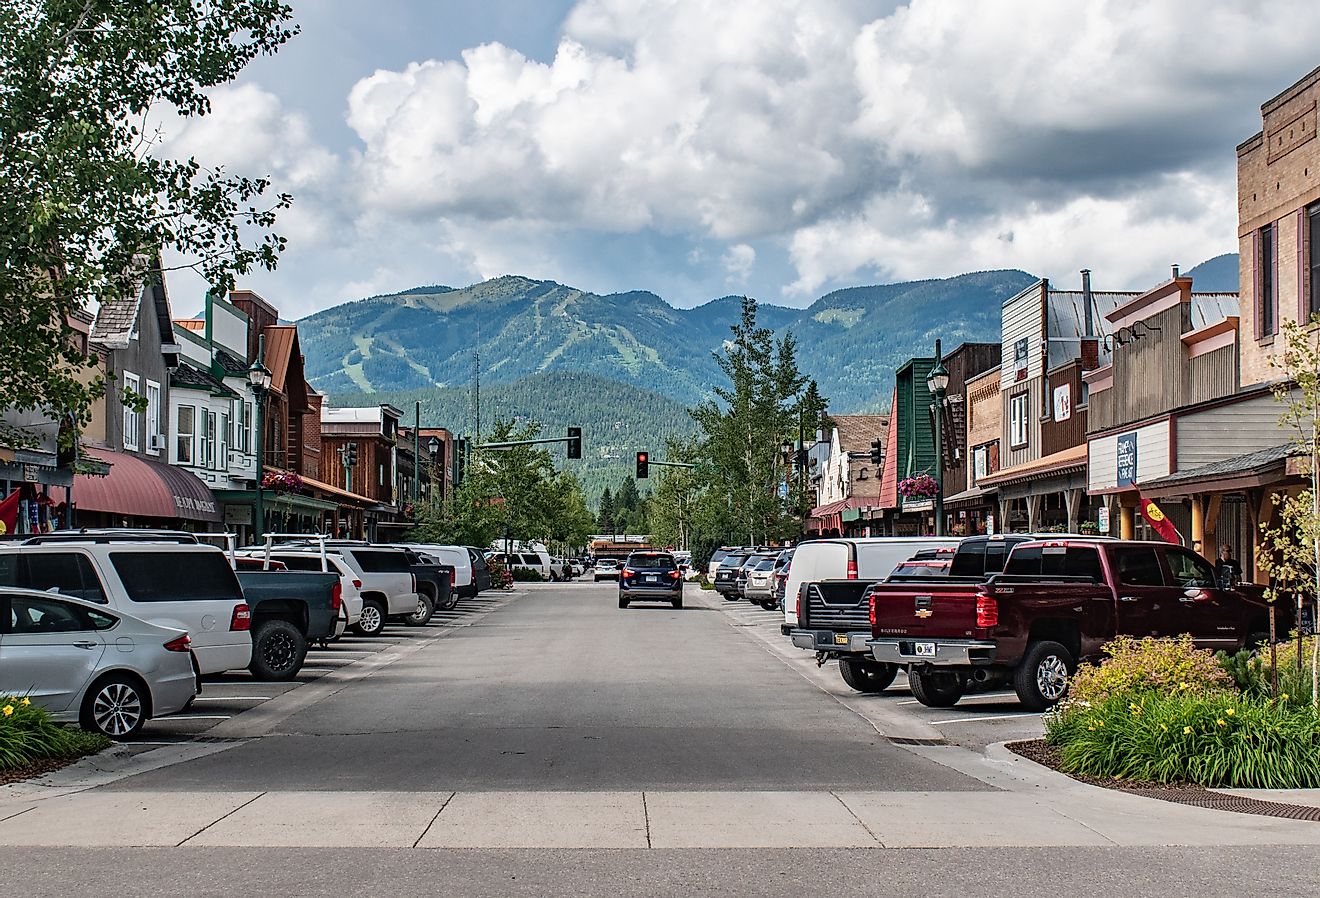 Main Street view of Whitefish, Montana with mountains in the background. Image credit Beeldtype via Shutterstock.